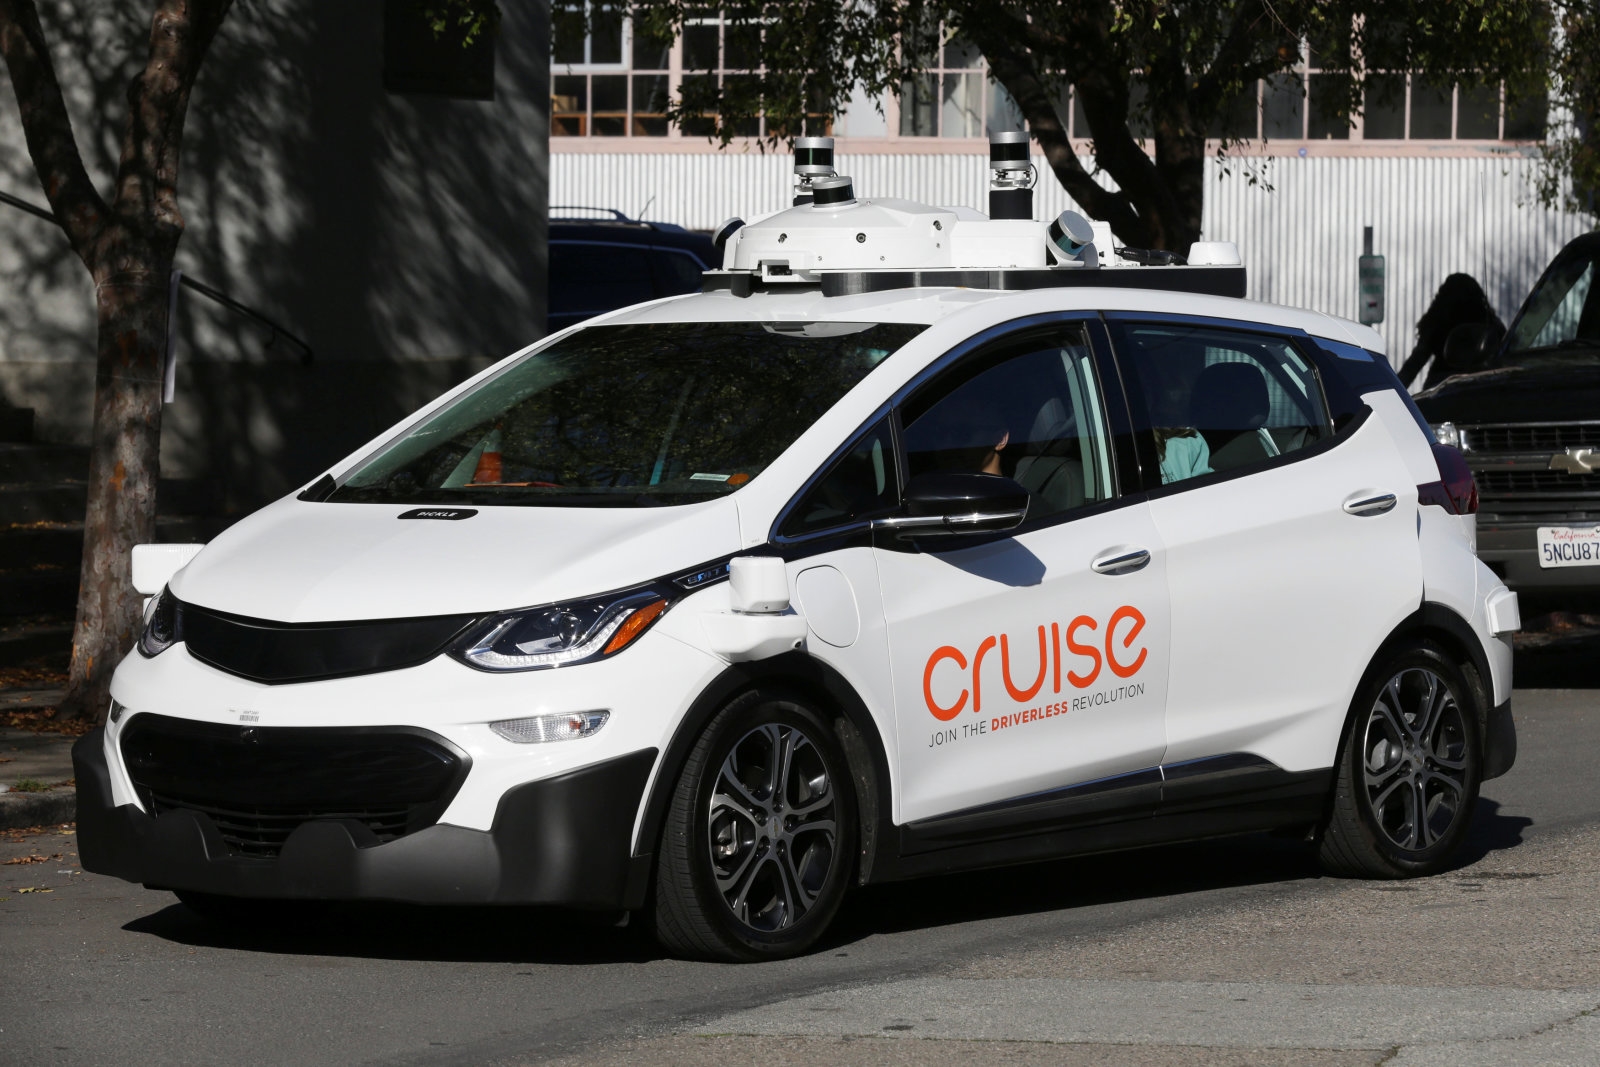 California axes self-driving car rule limiting liability for crashes | DeviceDaily.com